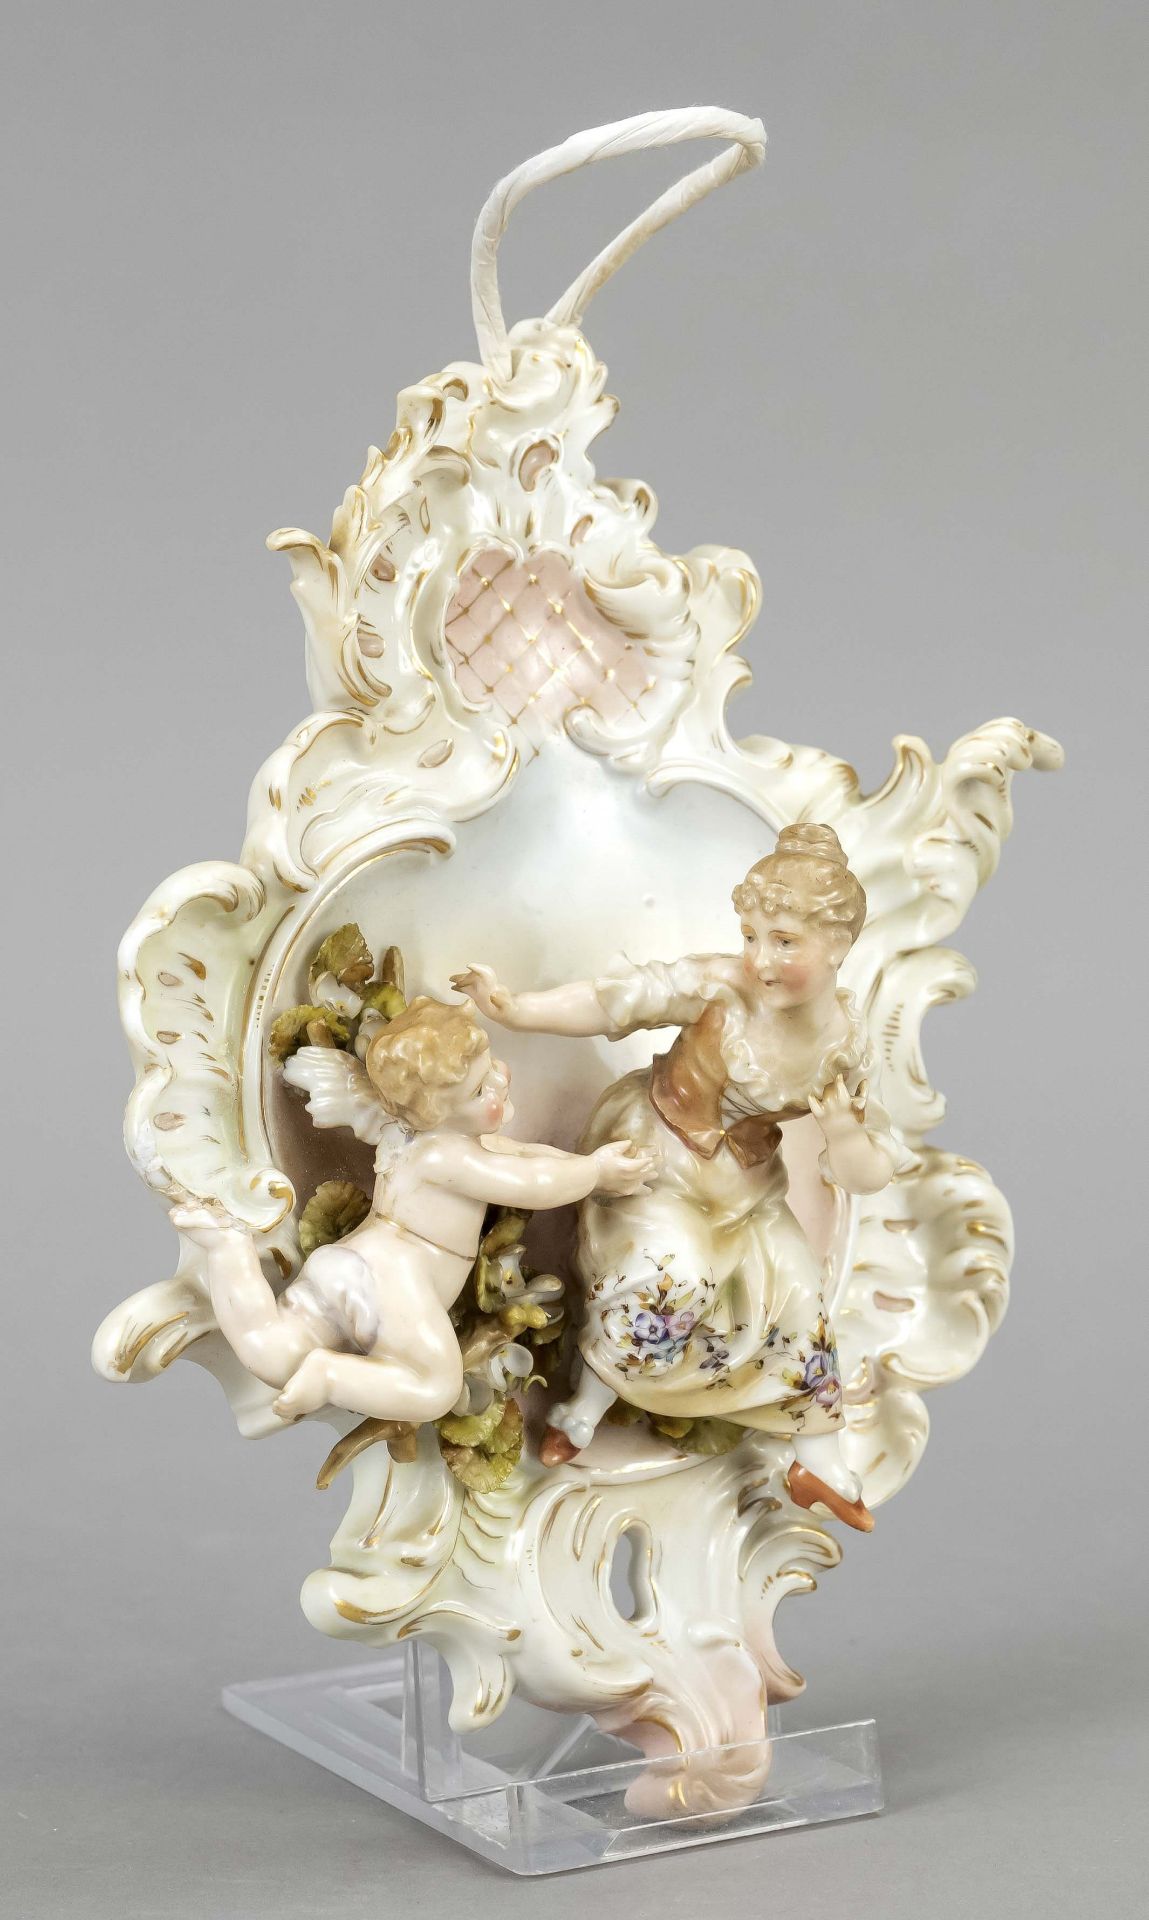 Figural wall applique, Triebner, Ens & Co., Volkstedt, Thuringia, mark 1894-1899, floating putto